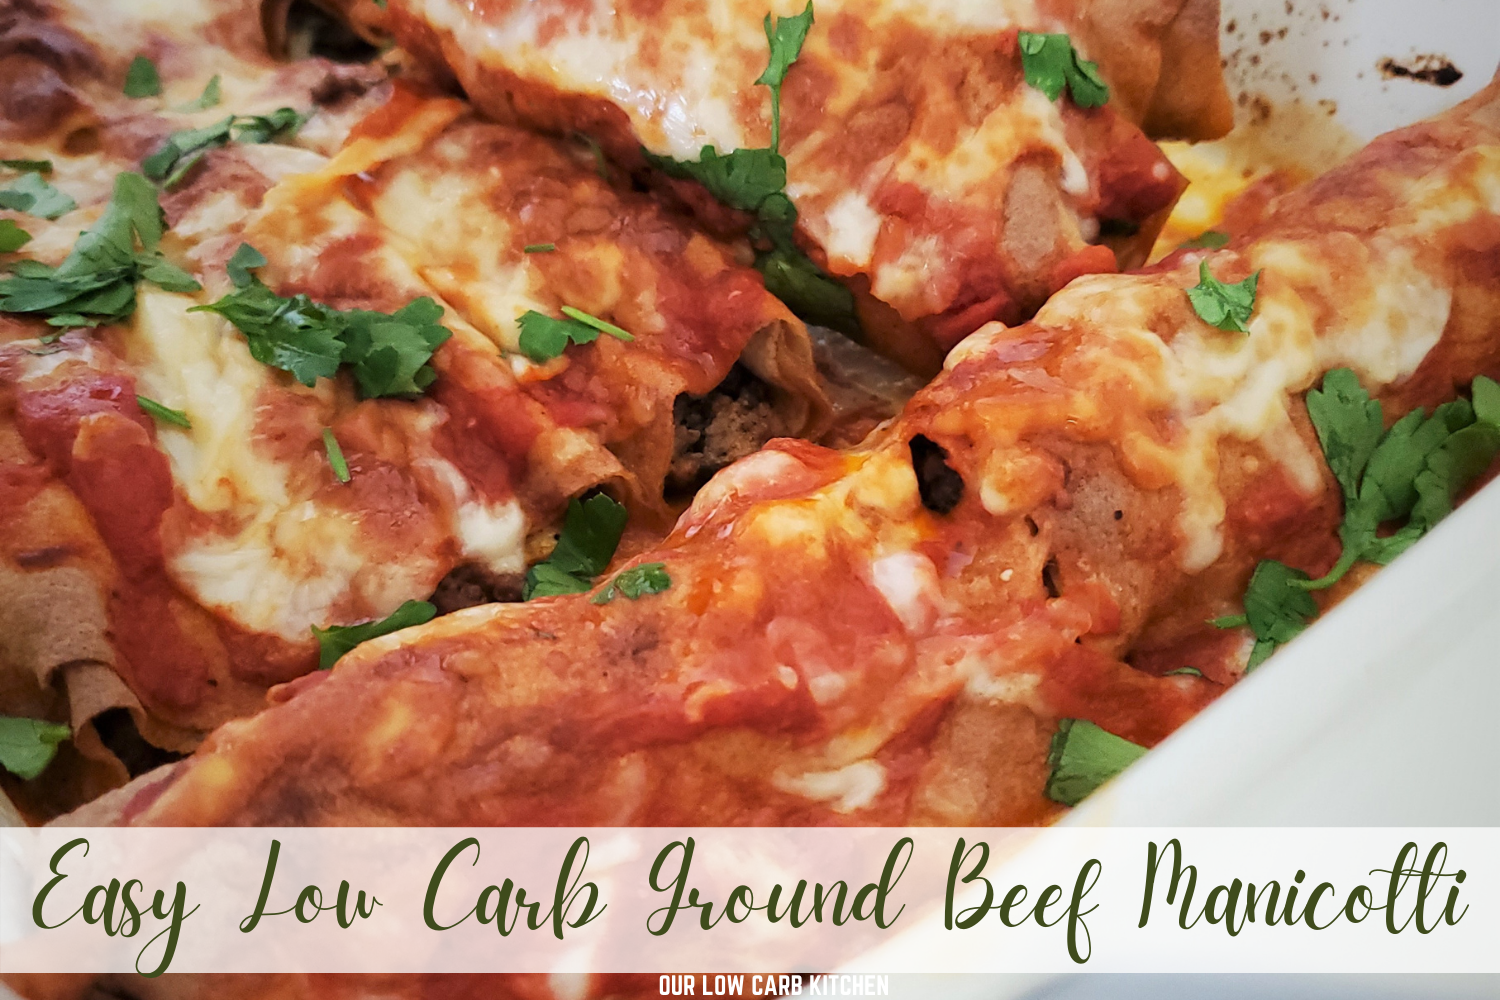 LOW CARB GROUND BEEF RECIPES FOR DINNER